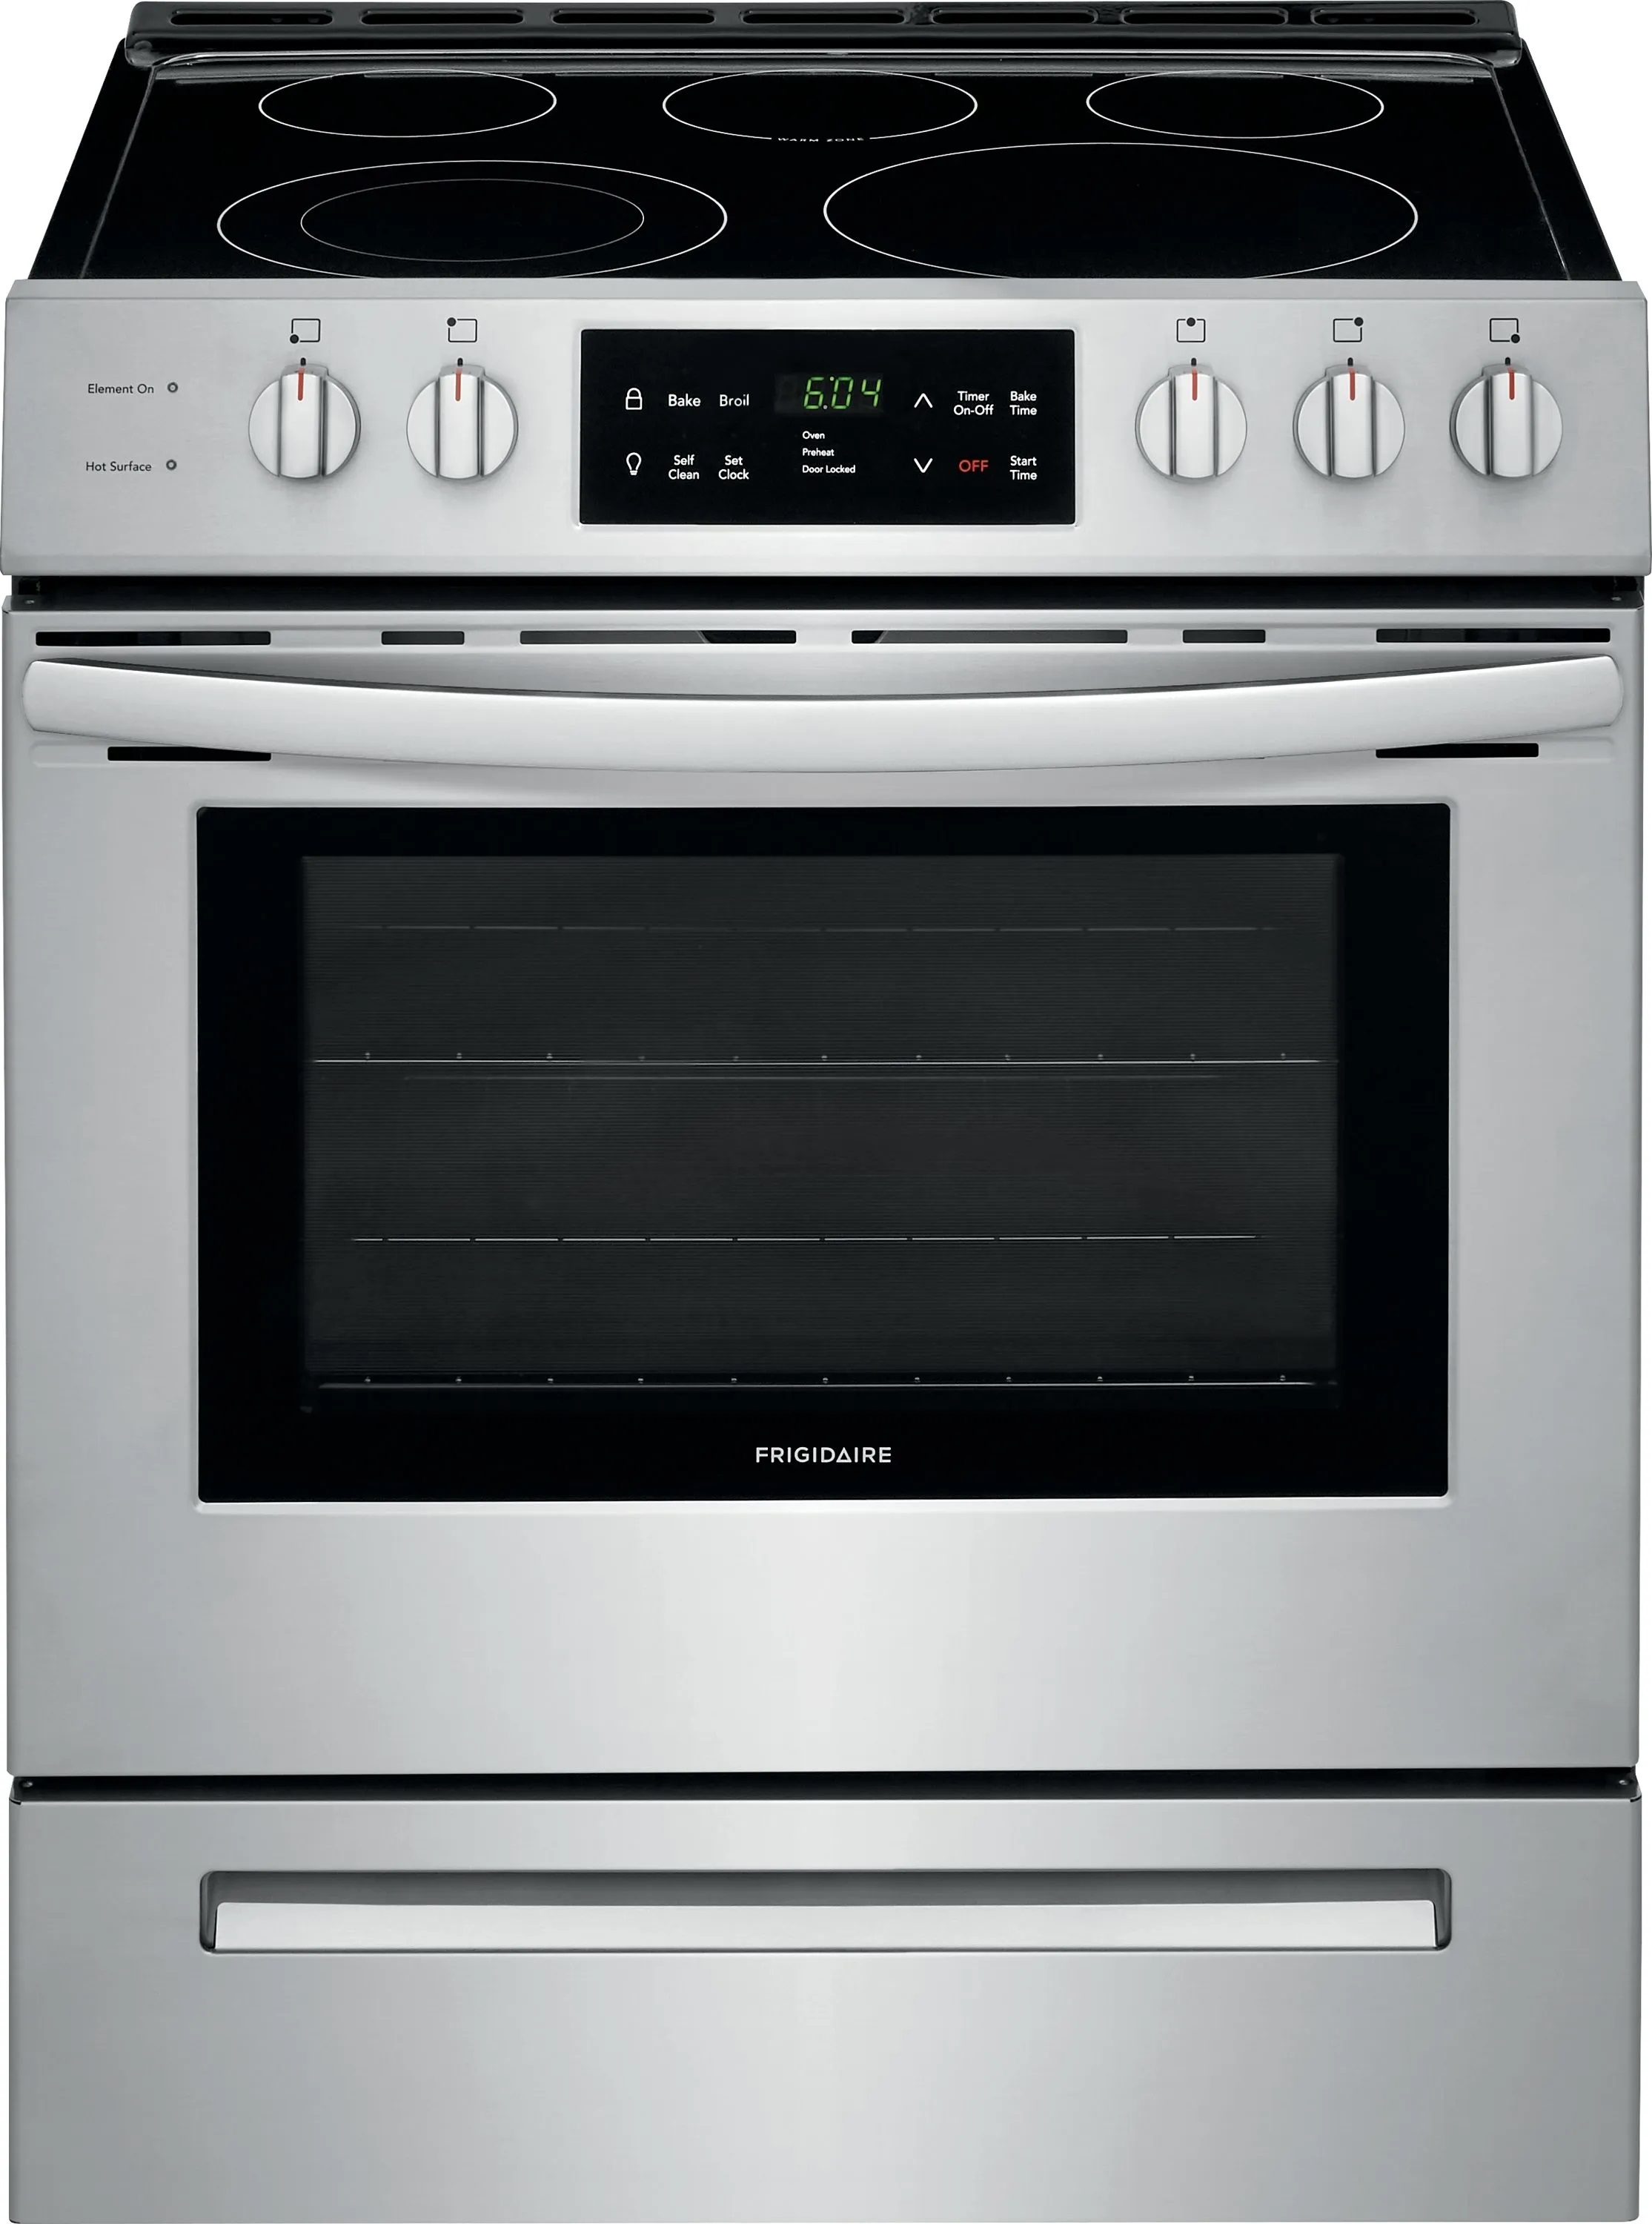 Front view of Frigidaire FFEH3054US 30” freestanding electric range 